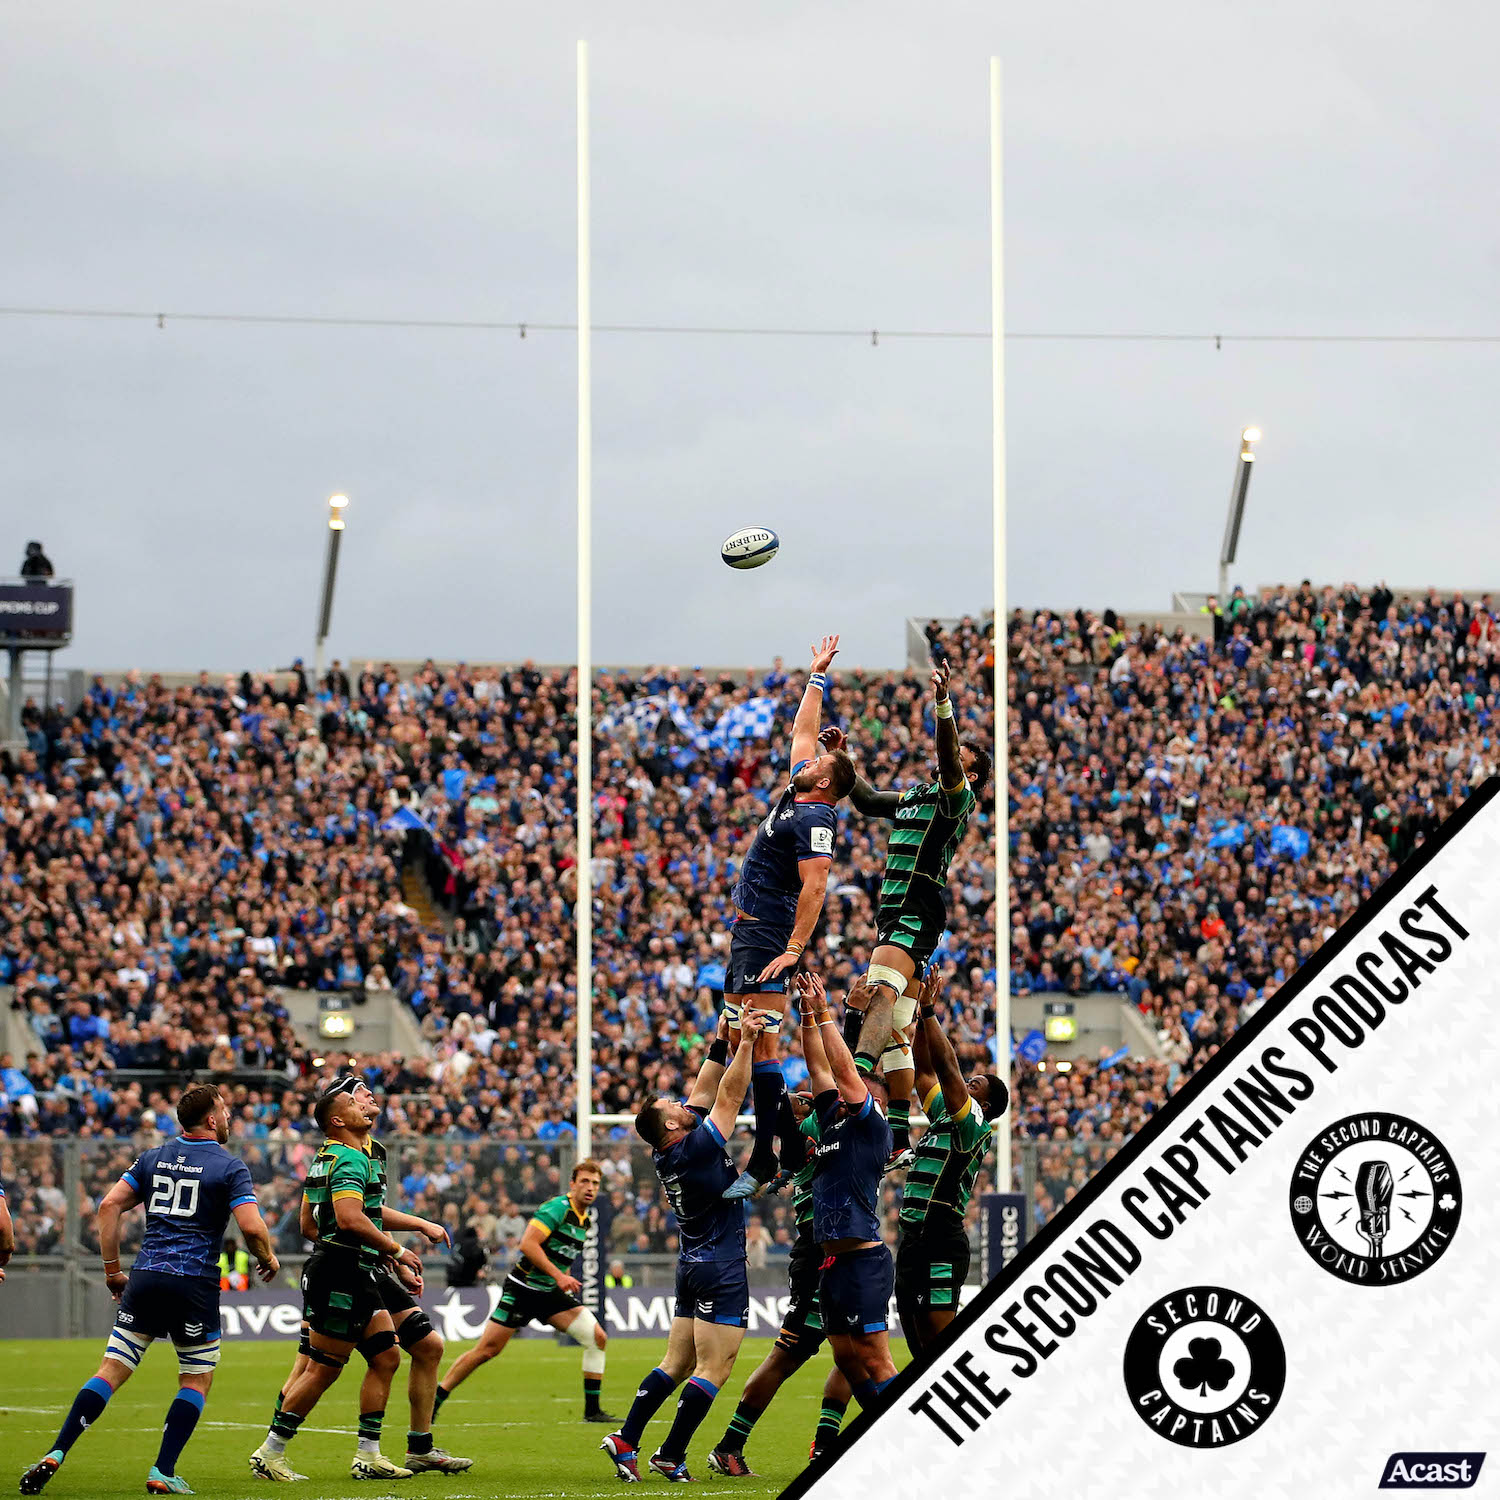 Episode 2933: The Leinster Express, The Pigeon, Salthill In the Sun, Adeleke Revs Up